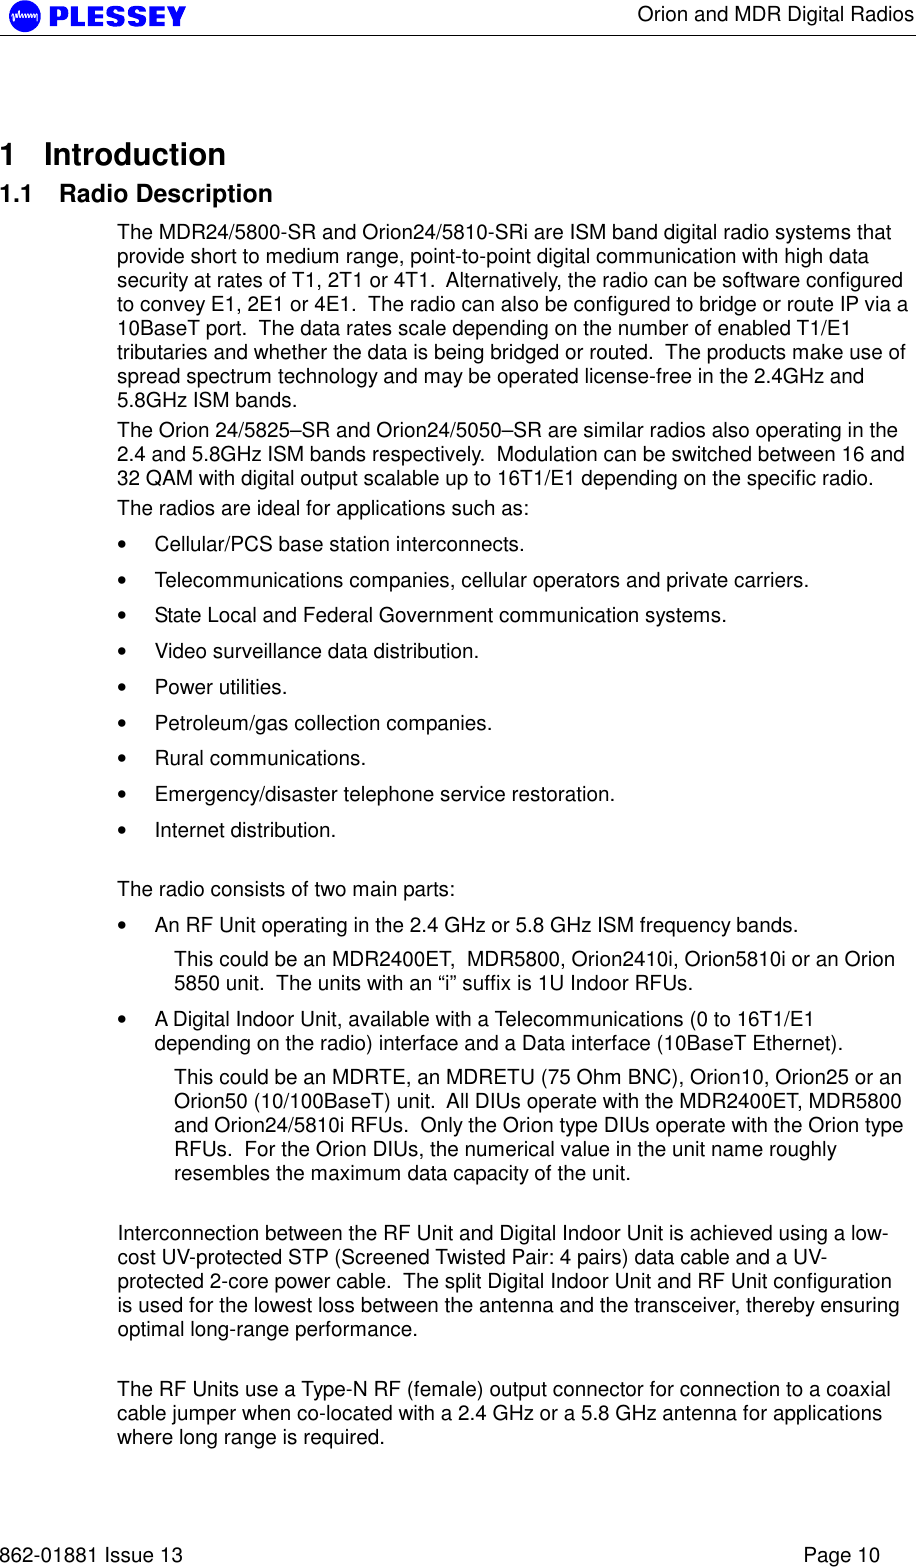      Orion and MDR Digital Radios   862-01881 Issue 13    Page 10  1 Introduction 1.1 Radio Description The MDR24/5800-SR and Orion24/5810-SRi are ISM band digital radio systems that provide short to medium range, point-to-point digital communication with high data security at rates of T1, 2T1 or 4T1.  Alternatively, the radio can be software configured to convey E1, 2E1 or 4E1.  The radio can also be configured to bridge or route IP via a 10BaseT port.  The data rates scale depending on the number of enabled T1/E1 tributaries and whether the data is being bridged or routed.  The products make use of spread spectrum technology and may be operated license-free in the 2.4GHz and 5.8GHz ISM bands.   The Orion 24/5825–SR and Orion24/5050–SR are similar radios also operating in the 2.4 and 5.8GHz ISM bands respectively.  Modulation can be switched between 16 and 32 QAM with digital output scalable up to 16T1/E1 depending on the specific radio. The radios are ideal for applications such as:  • Cellular/PCS base station interconnects. • Telecommunications companies, cellular operators and private carriers. • State Local and Federal Government communication systems. • Video surveillance data distribution. • Power utilities. • Petroleum/gas collection companies. • Rural communications. • Emergency/disaster telephone service restoration. • Internet distribution.  The radio consists of two main parts: • An RF Unit operating in the 2.4 GHz or 5.8 GHz ISM frequency bands. This could be an MDR2400ET,  MDR5800, Orion2410i, Orion5810i or an Orion 5850 unit.  The units with an “i” suffix is 1U Indoor RFUs. • A Digital Indoor Unit, available with a Telecommunications (0 to 16T1/E1 depending on the radio) interface and a Data interface (10BaseT Ethernet). This could be an MDRTE, an MDRETU (75 Ohm BNC), Orion10, Orion25 or an Orion50 (10/100BaseT) unit.  All DIUs operate with the MDR2400ET, MDR5800 and Orion24/5810i RFUs.  Only the Orion type DIUs operate with the Orion type RFUs.  For the Orion DIUs, the numerical value in the unit name roughly resembles the maximum data capacity of the unit.  Interconnection between the RF Unit and Digital Indoor Unit is achieved using a low-cost UV-protected STP (Screened Twisted Pair: 4 pairs) data cable and a UV-protected 2-core power cable.  The split Digital Indoor Unit and RF Unit configuration is used for the lowest loss between the antenna and the transceiver, thereby ensuring optimal long-range performance.  The RF Units use a Type-N RF (female) output connector for connection to a coaxial cable jumper when co-located with a 2.4 GHz or a 5.8 GHz antenna for applications where long range is required. 